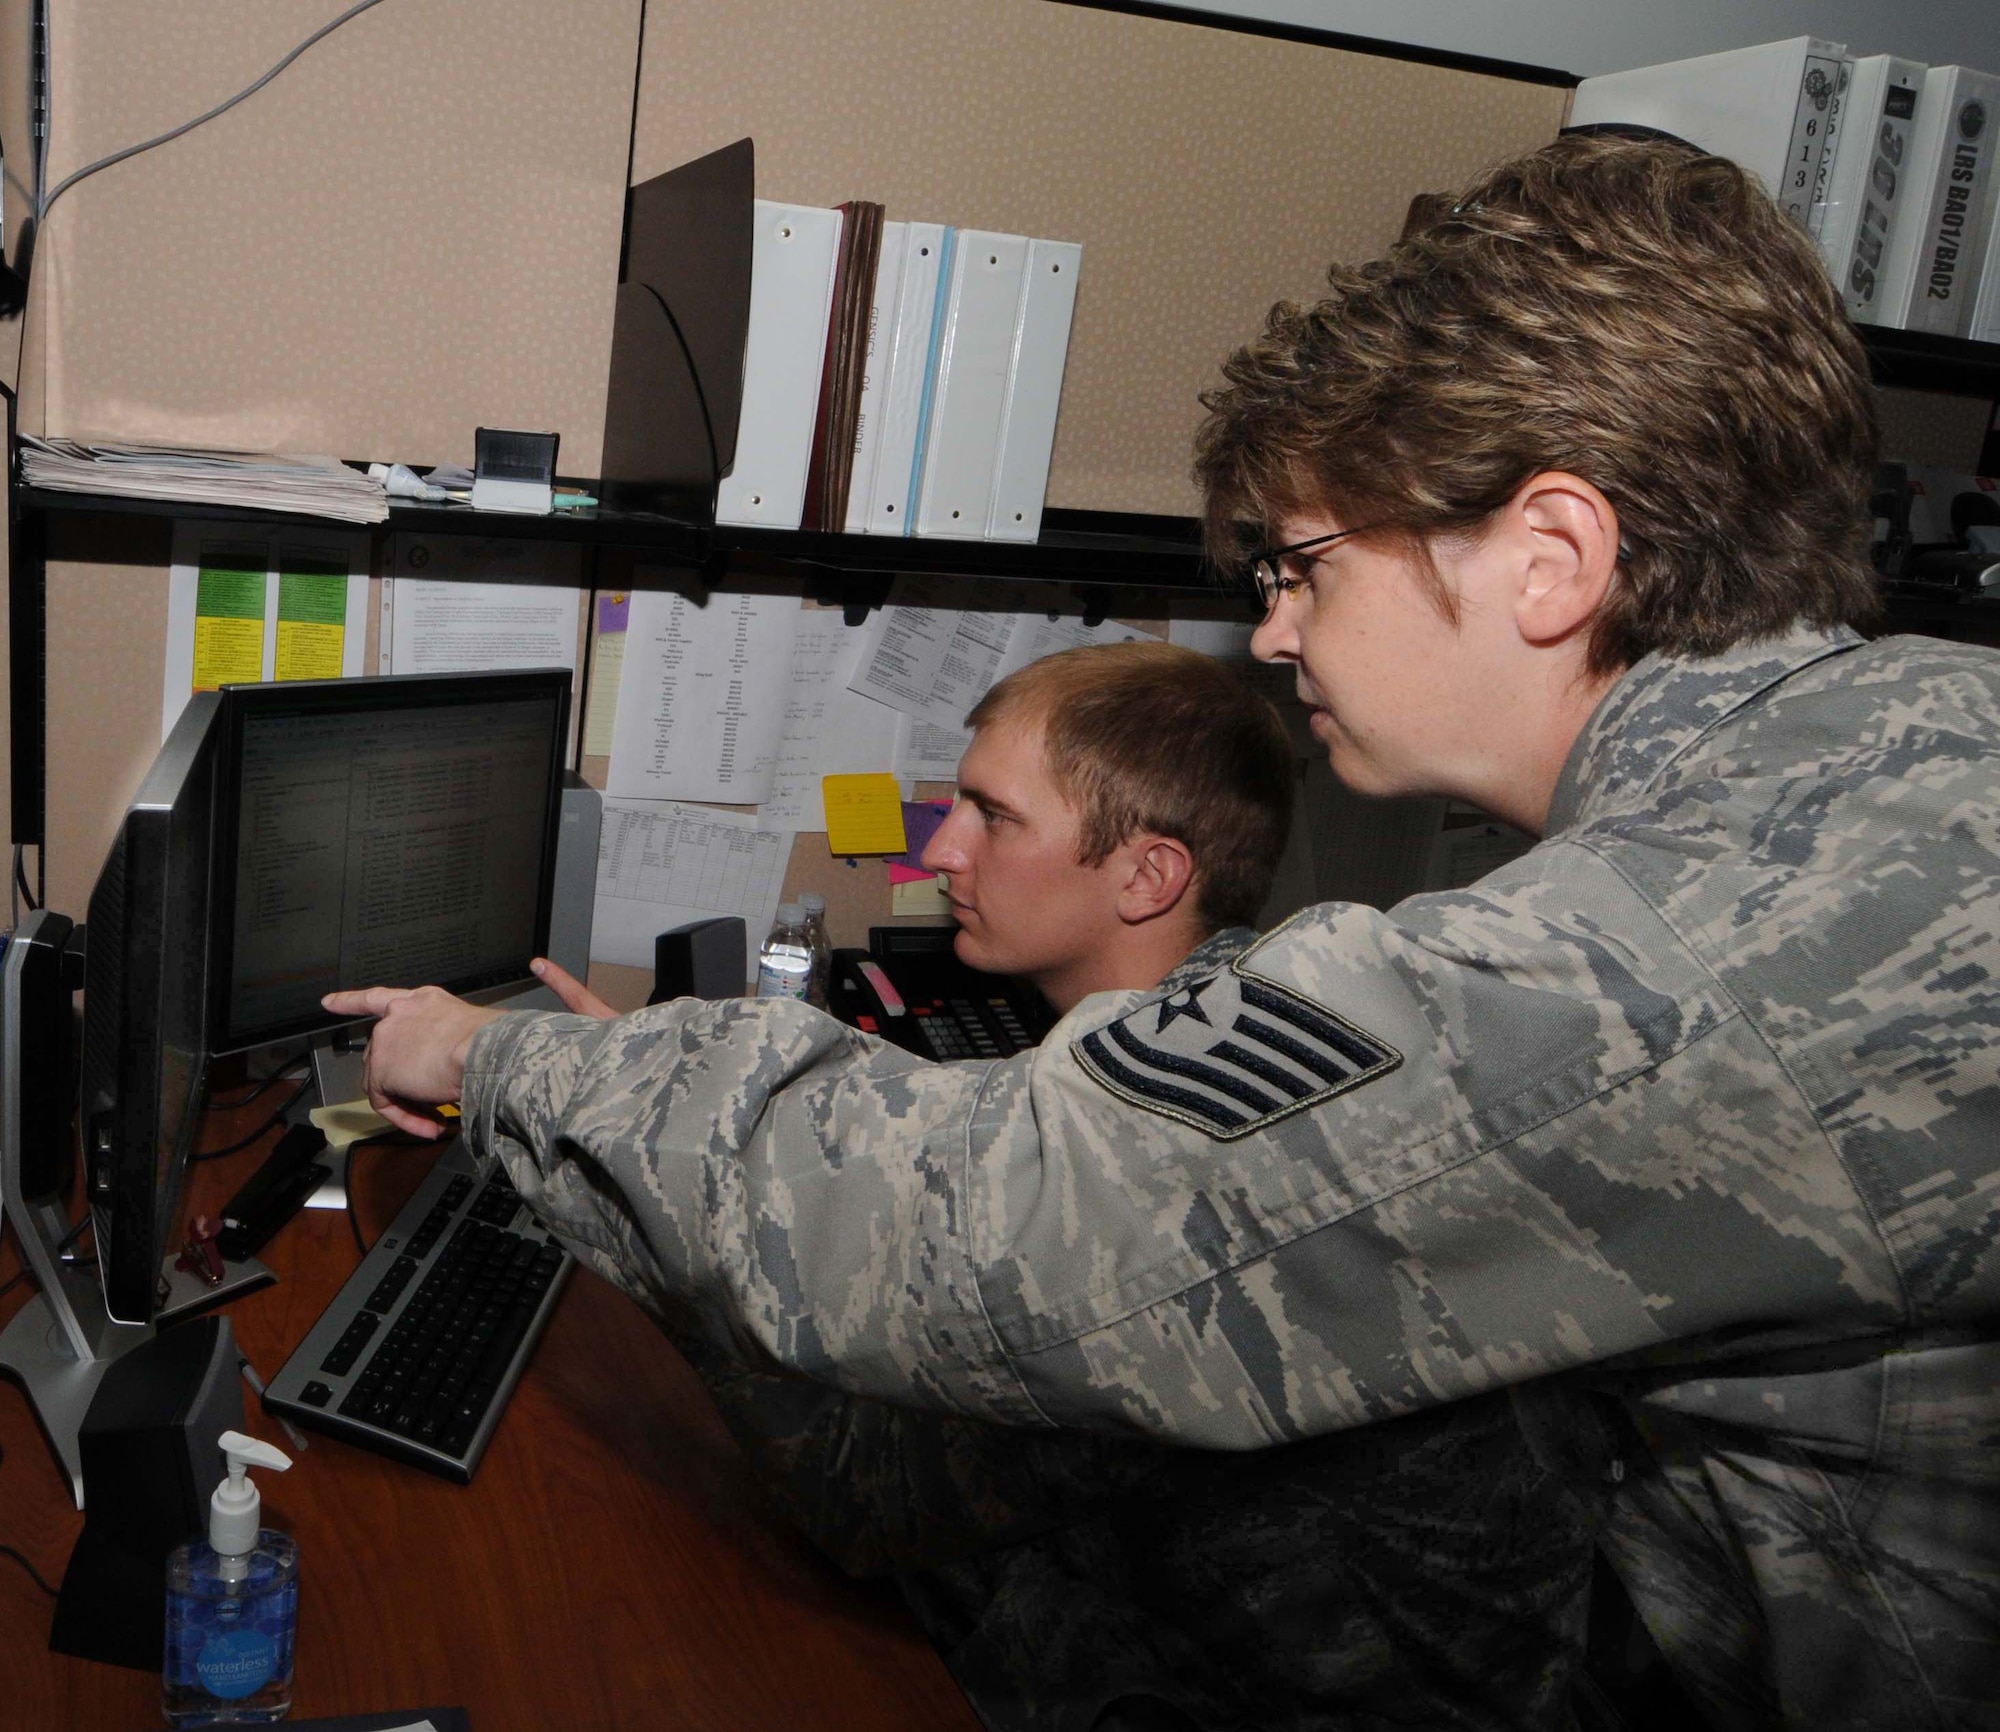 ANDERSEN AIR FORCE BASE, Guam - Tech. Sgt. Sharon Westerkamp assists 2nd Lt. Matthew Gensic in reviewing the status of the 36th Wing's financial account Oct. 1 here. Sergeant Westerkamp and Lieutenant Gensic are both budget analysts assigned to the 36th Comptroller Squadron. Sergeant Westerkamp was recognized as 'Top Performer' by her flight commander.   (U.S. Air Force photo by Airman 1st Class Julian North)
